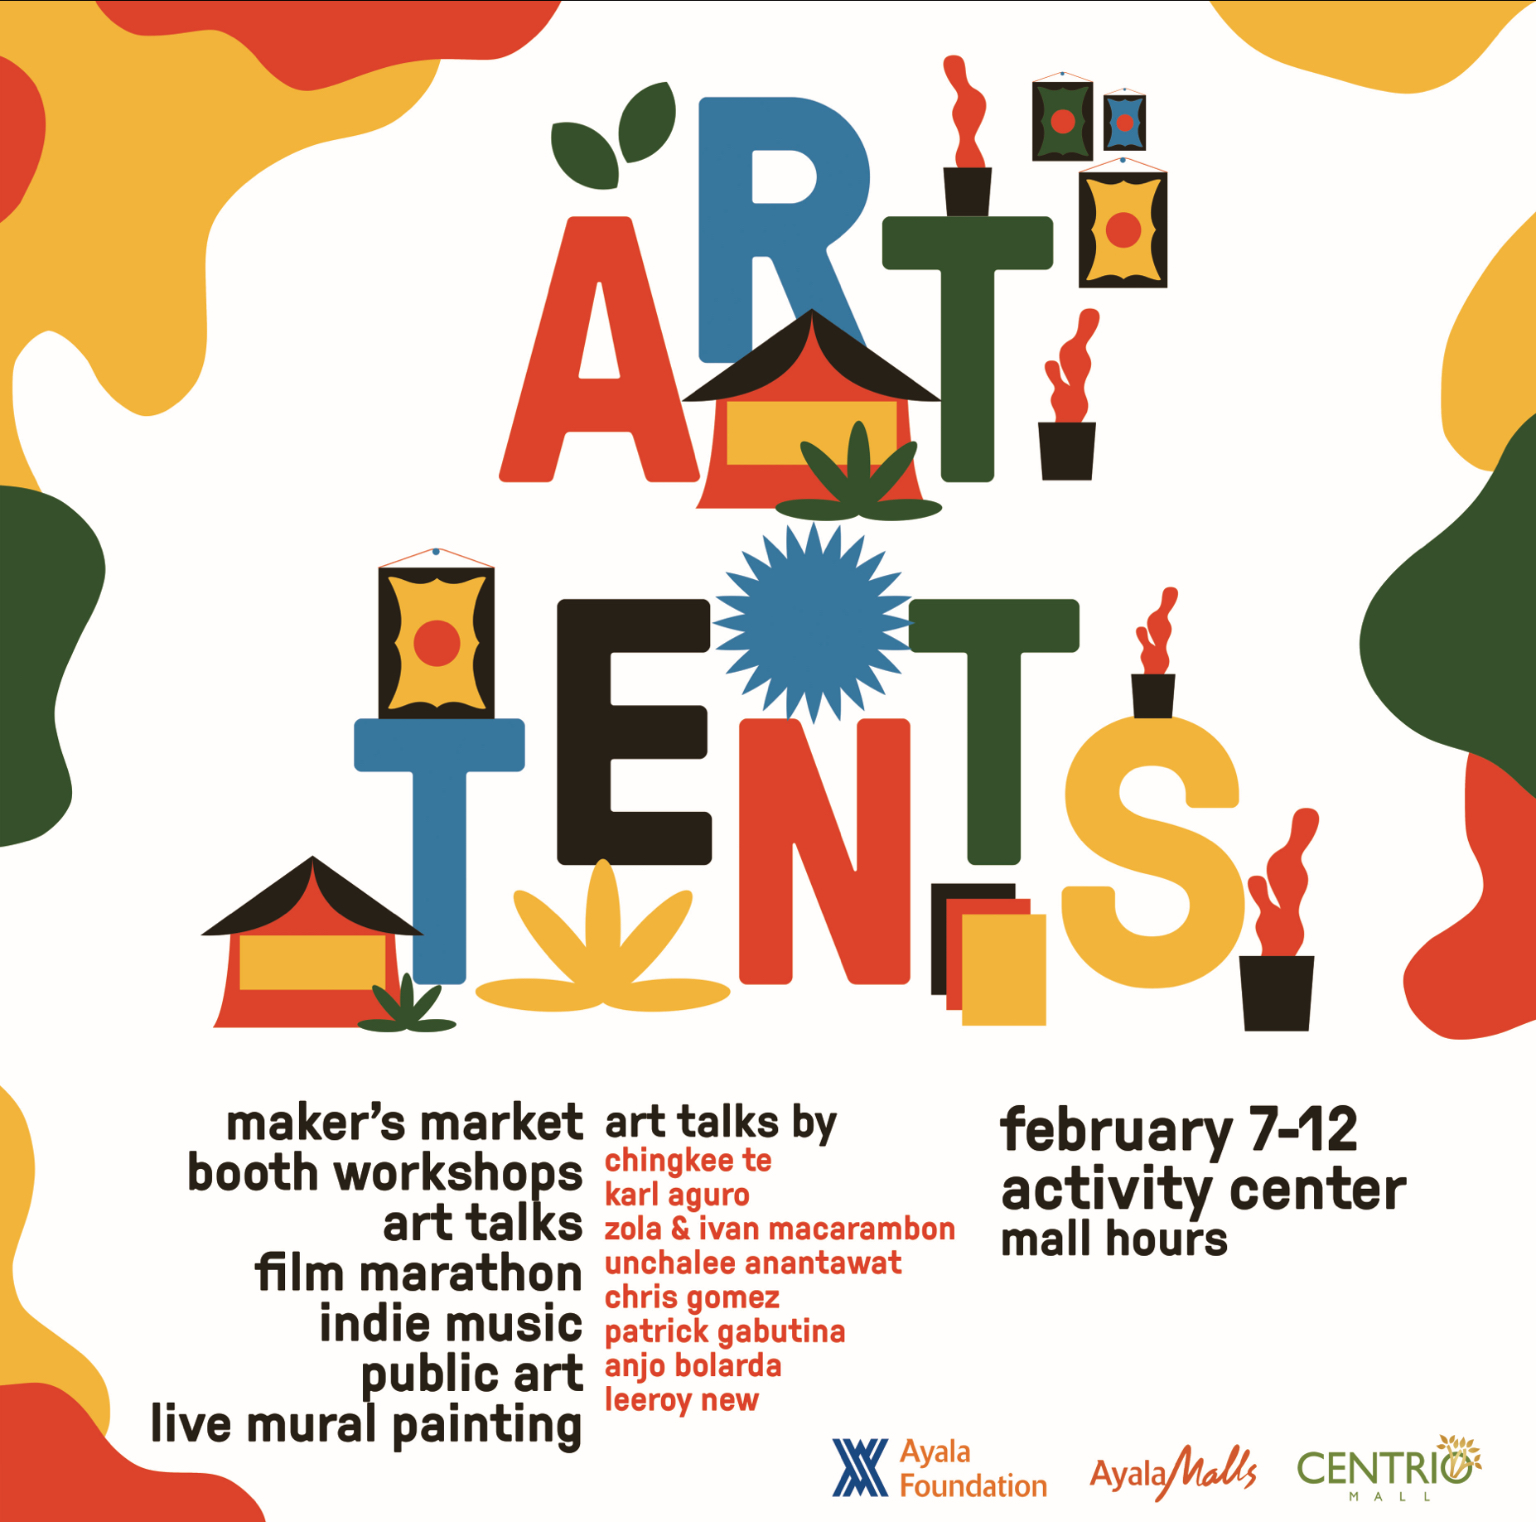 3rd Ayala Centrio Art Tents to showcase Filipino global talents, raise funds for tent city